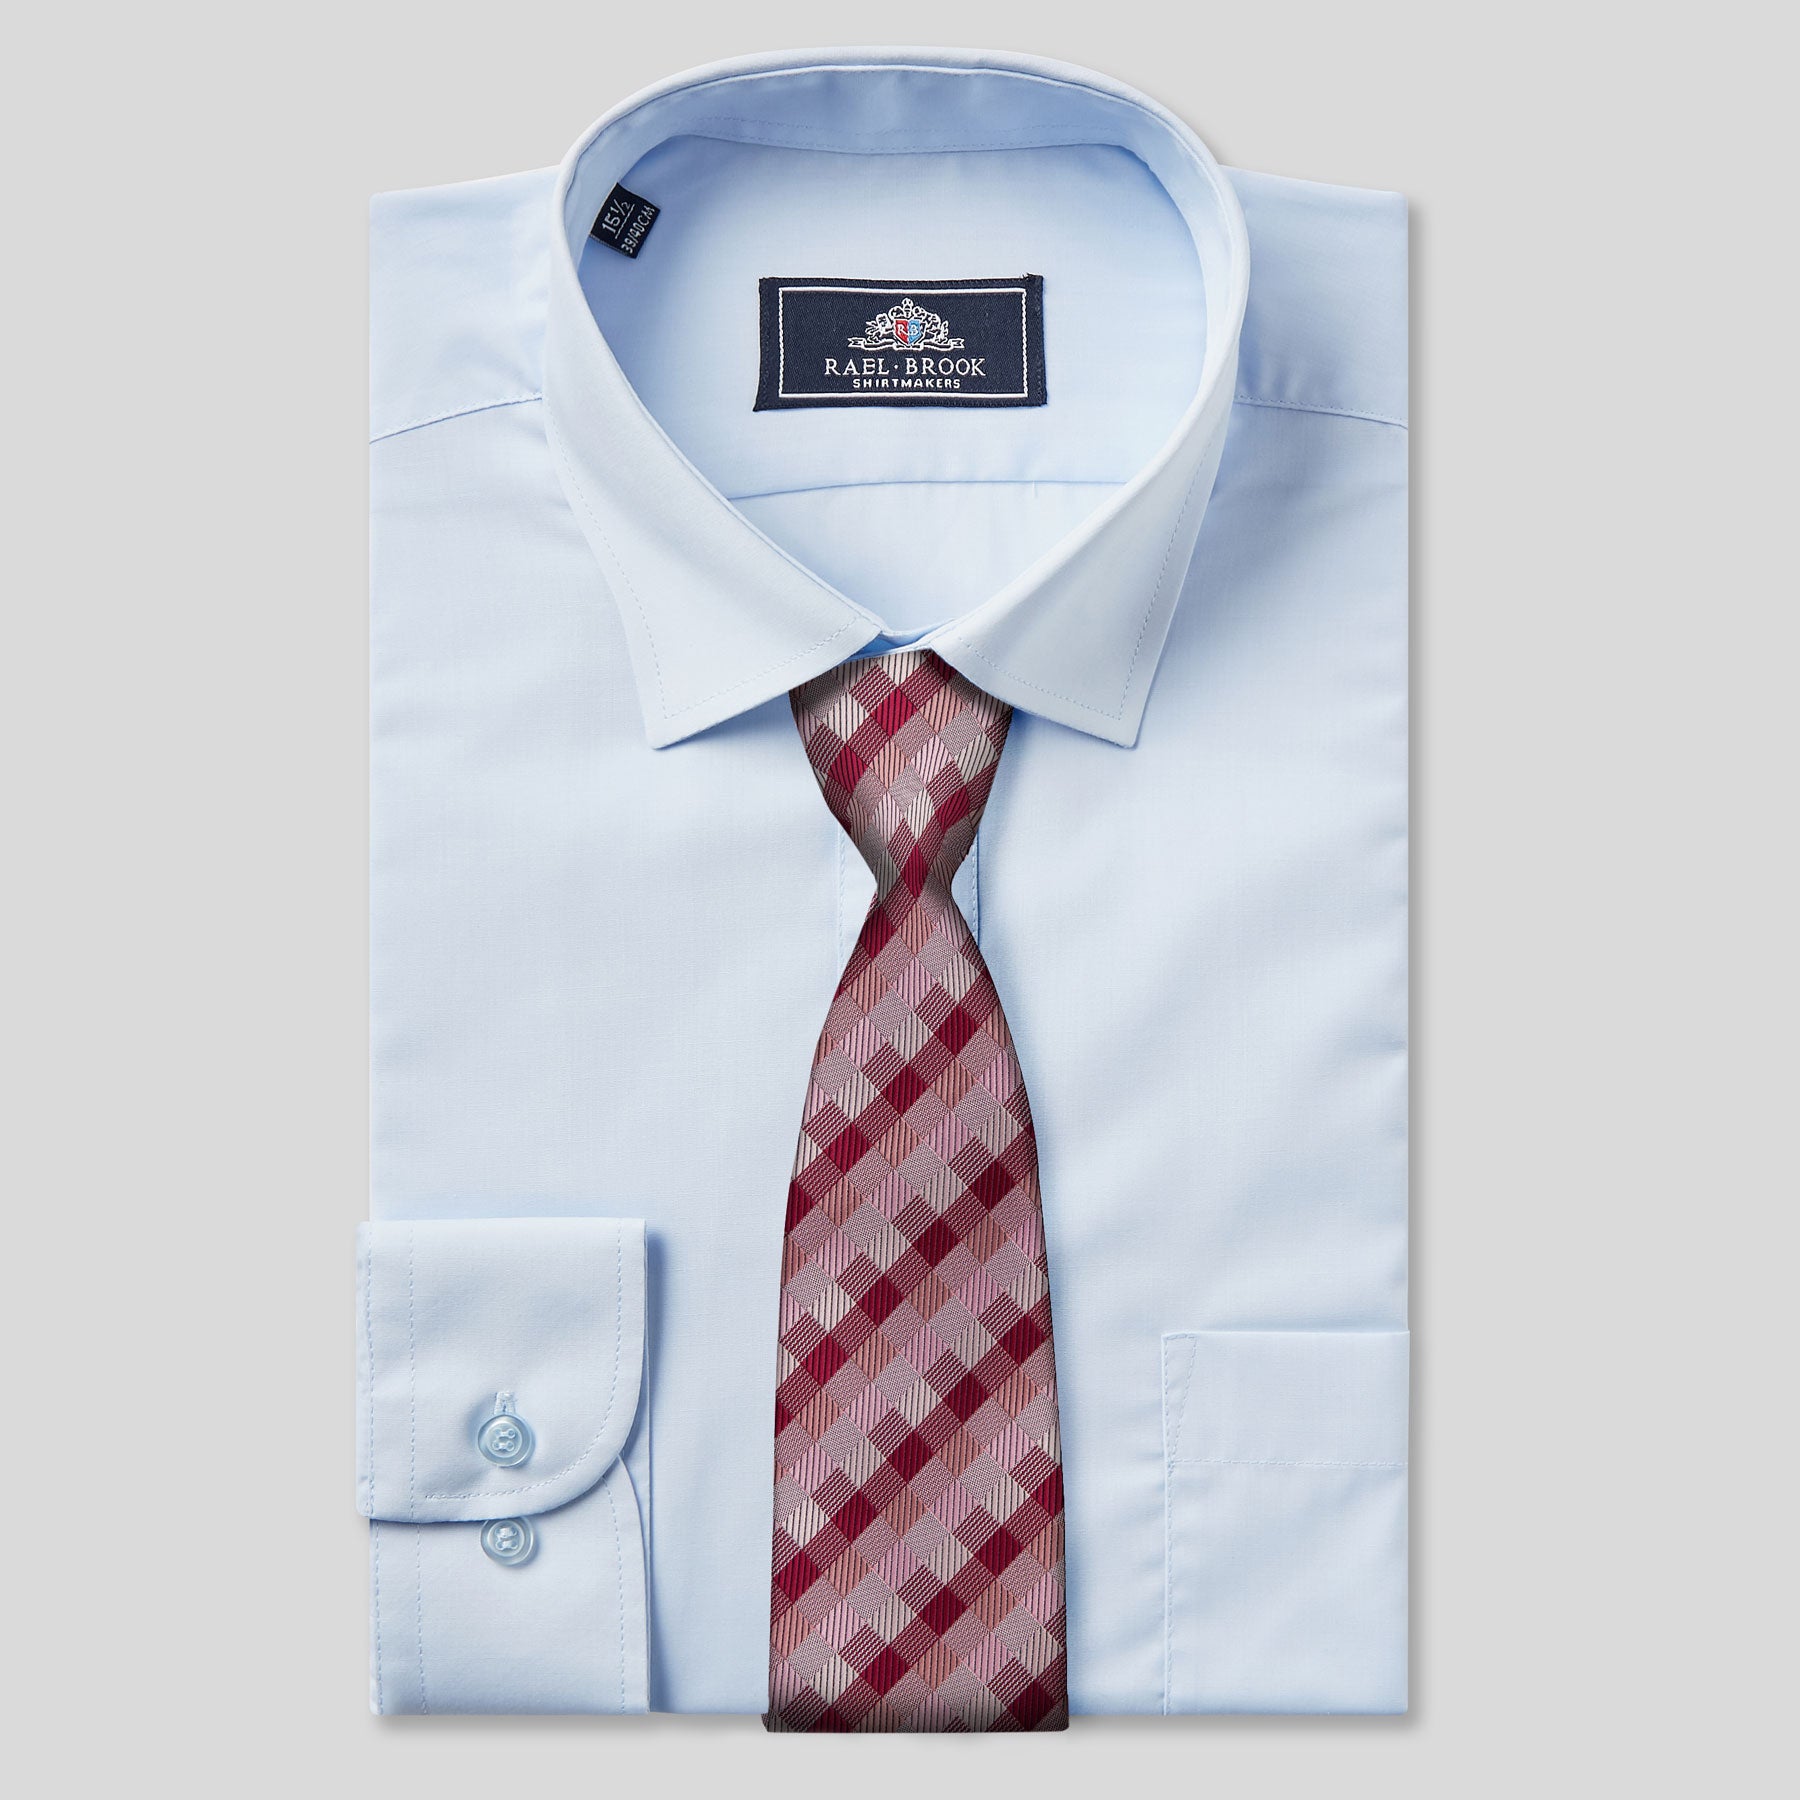 Tie to wear with light blue shirt